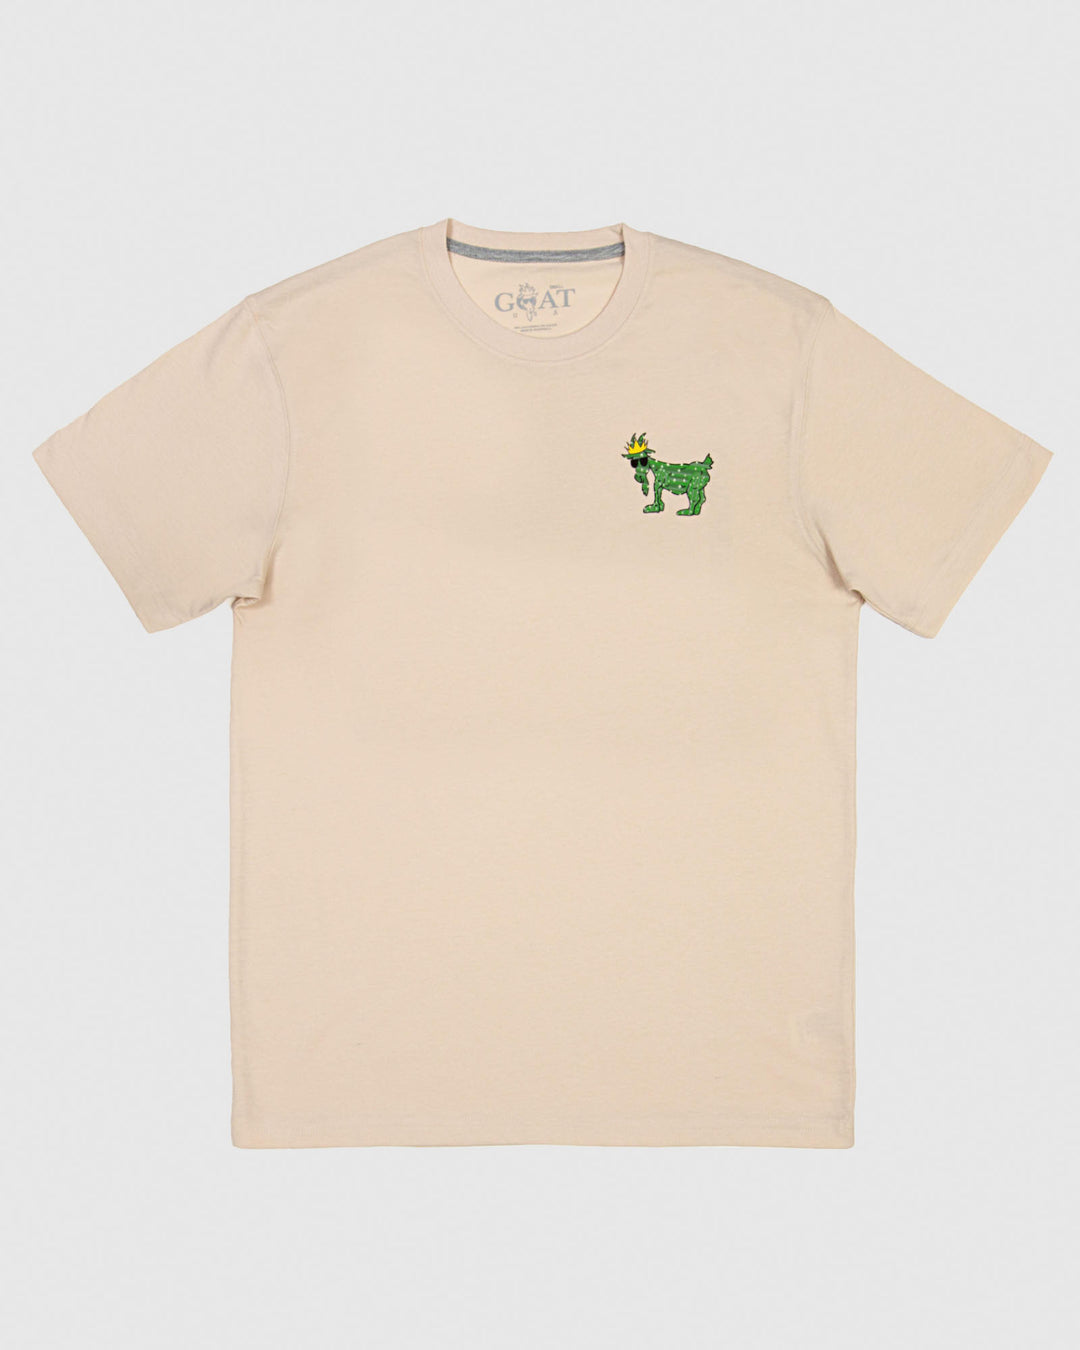 Front of sandshell-colored t-shirt with cactus goat design